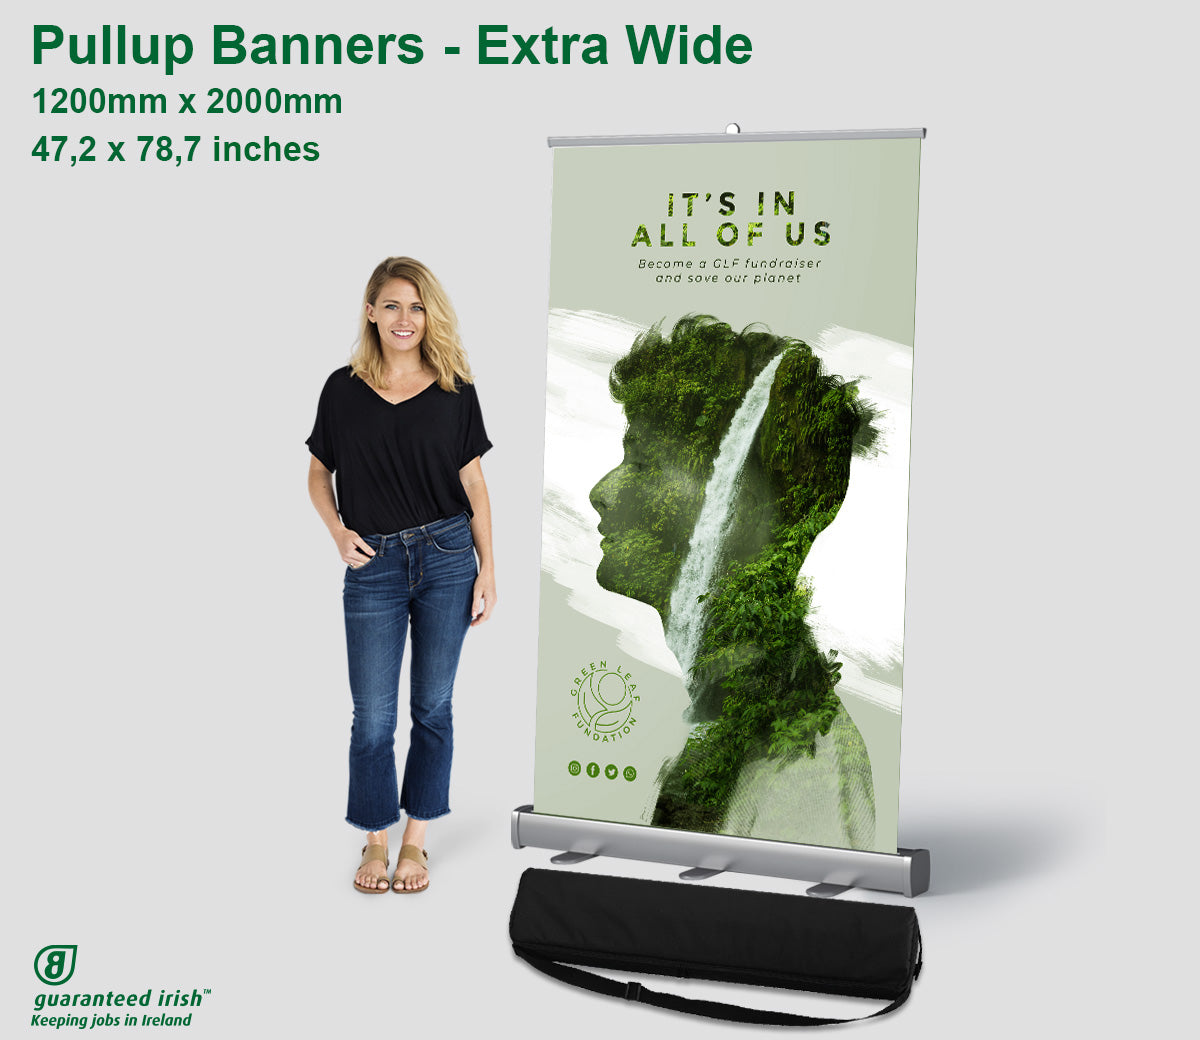 Pullup Banners - Extra Wide